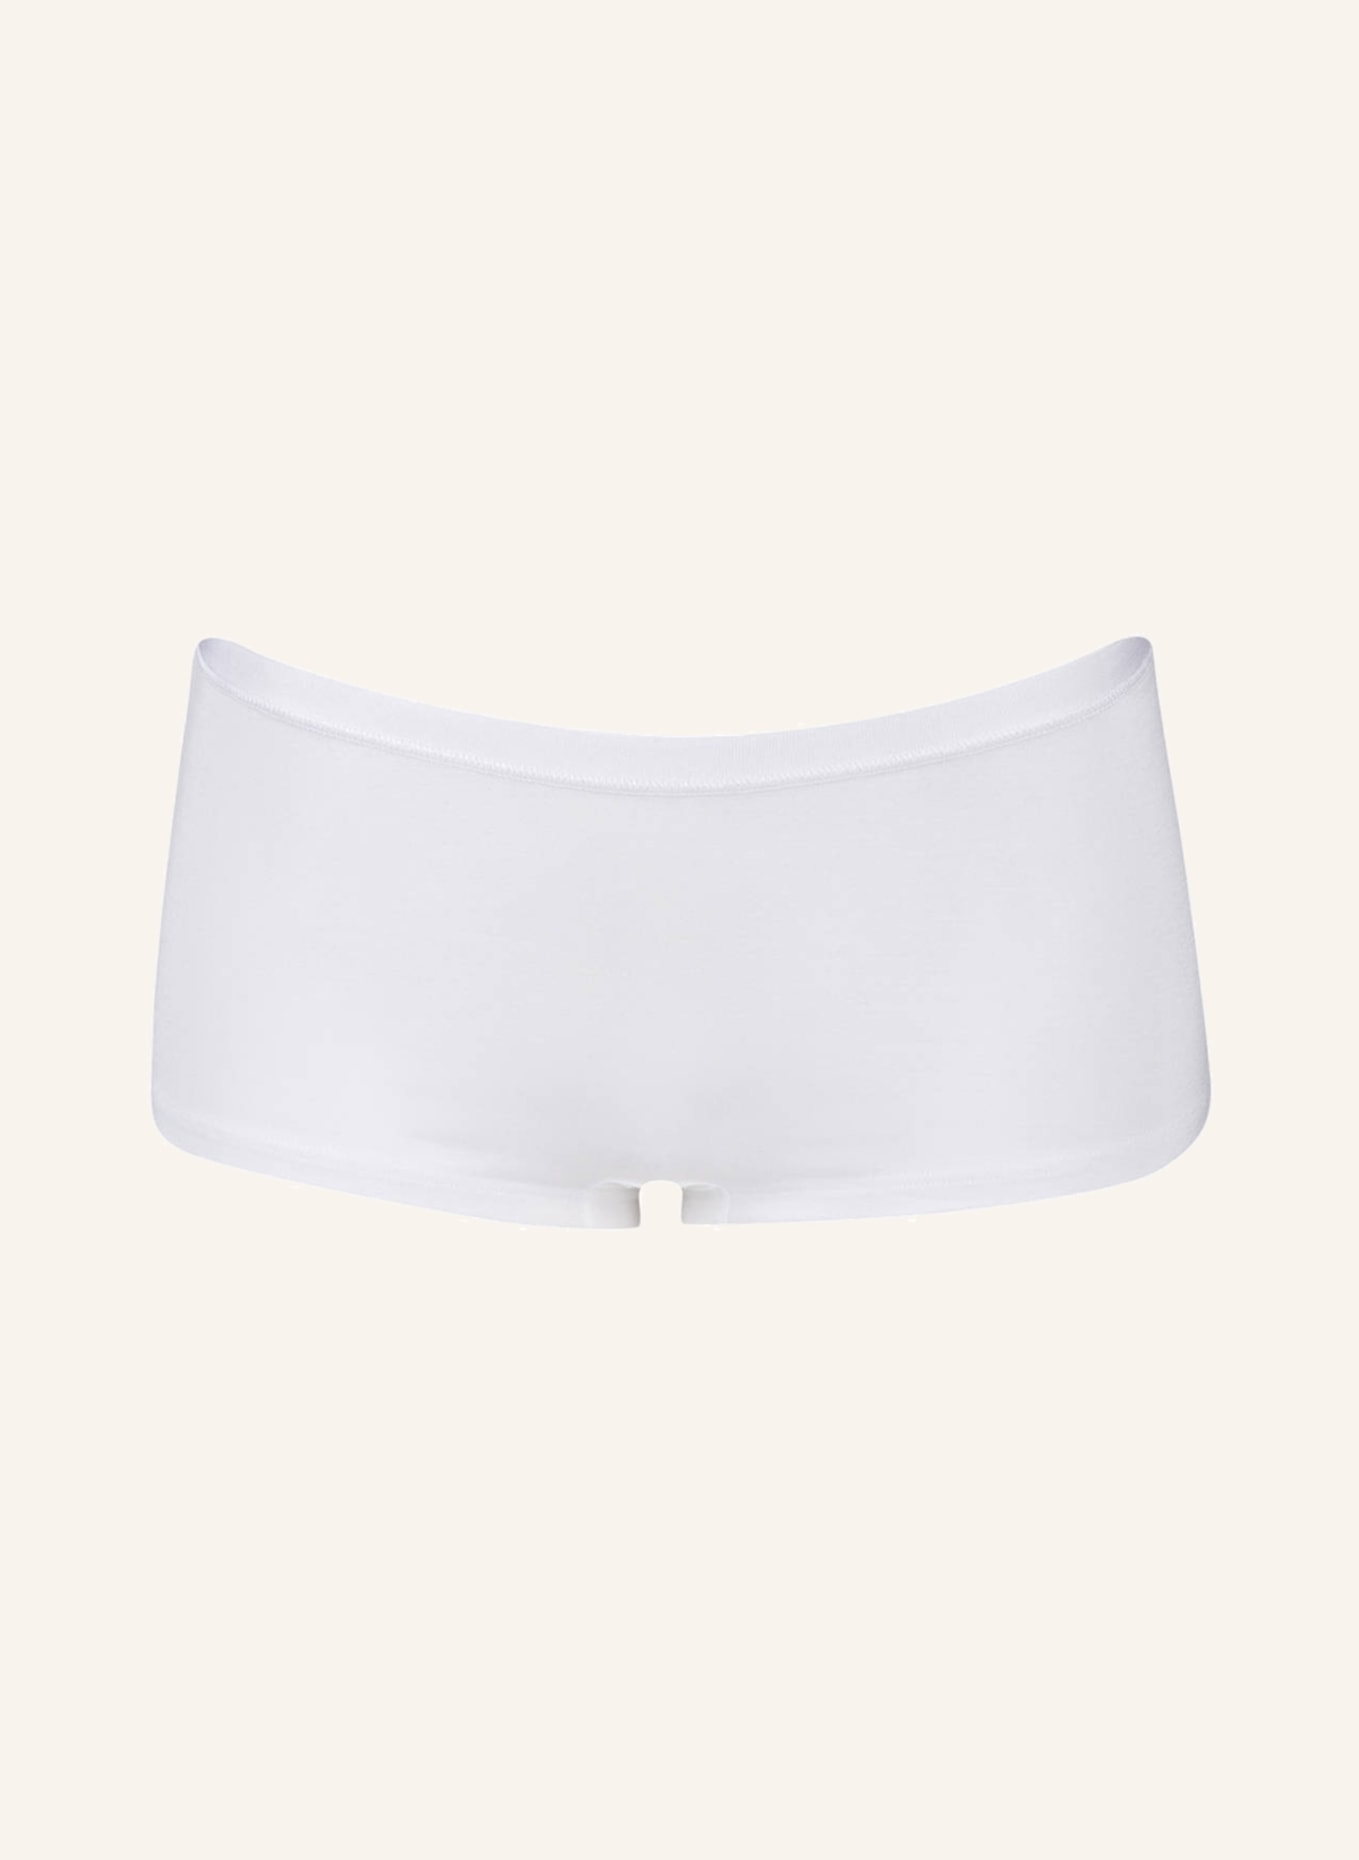 HANRO Panty SOFT TOUCH, Farbe: WEISS (Bild 1)